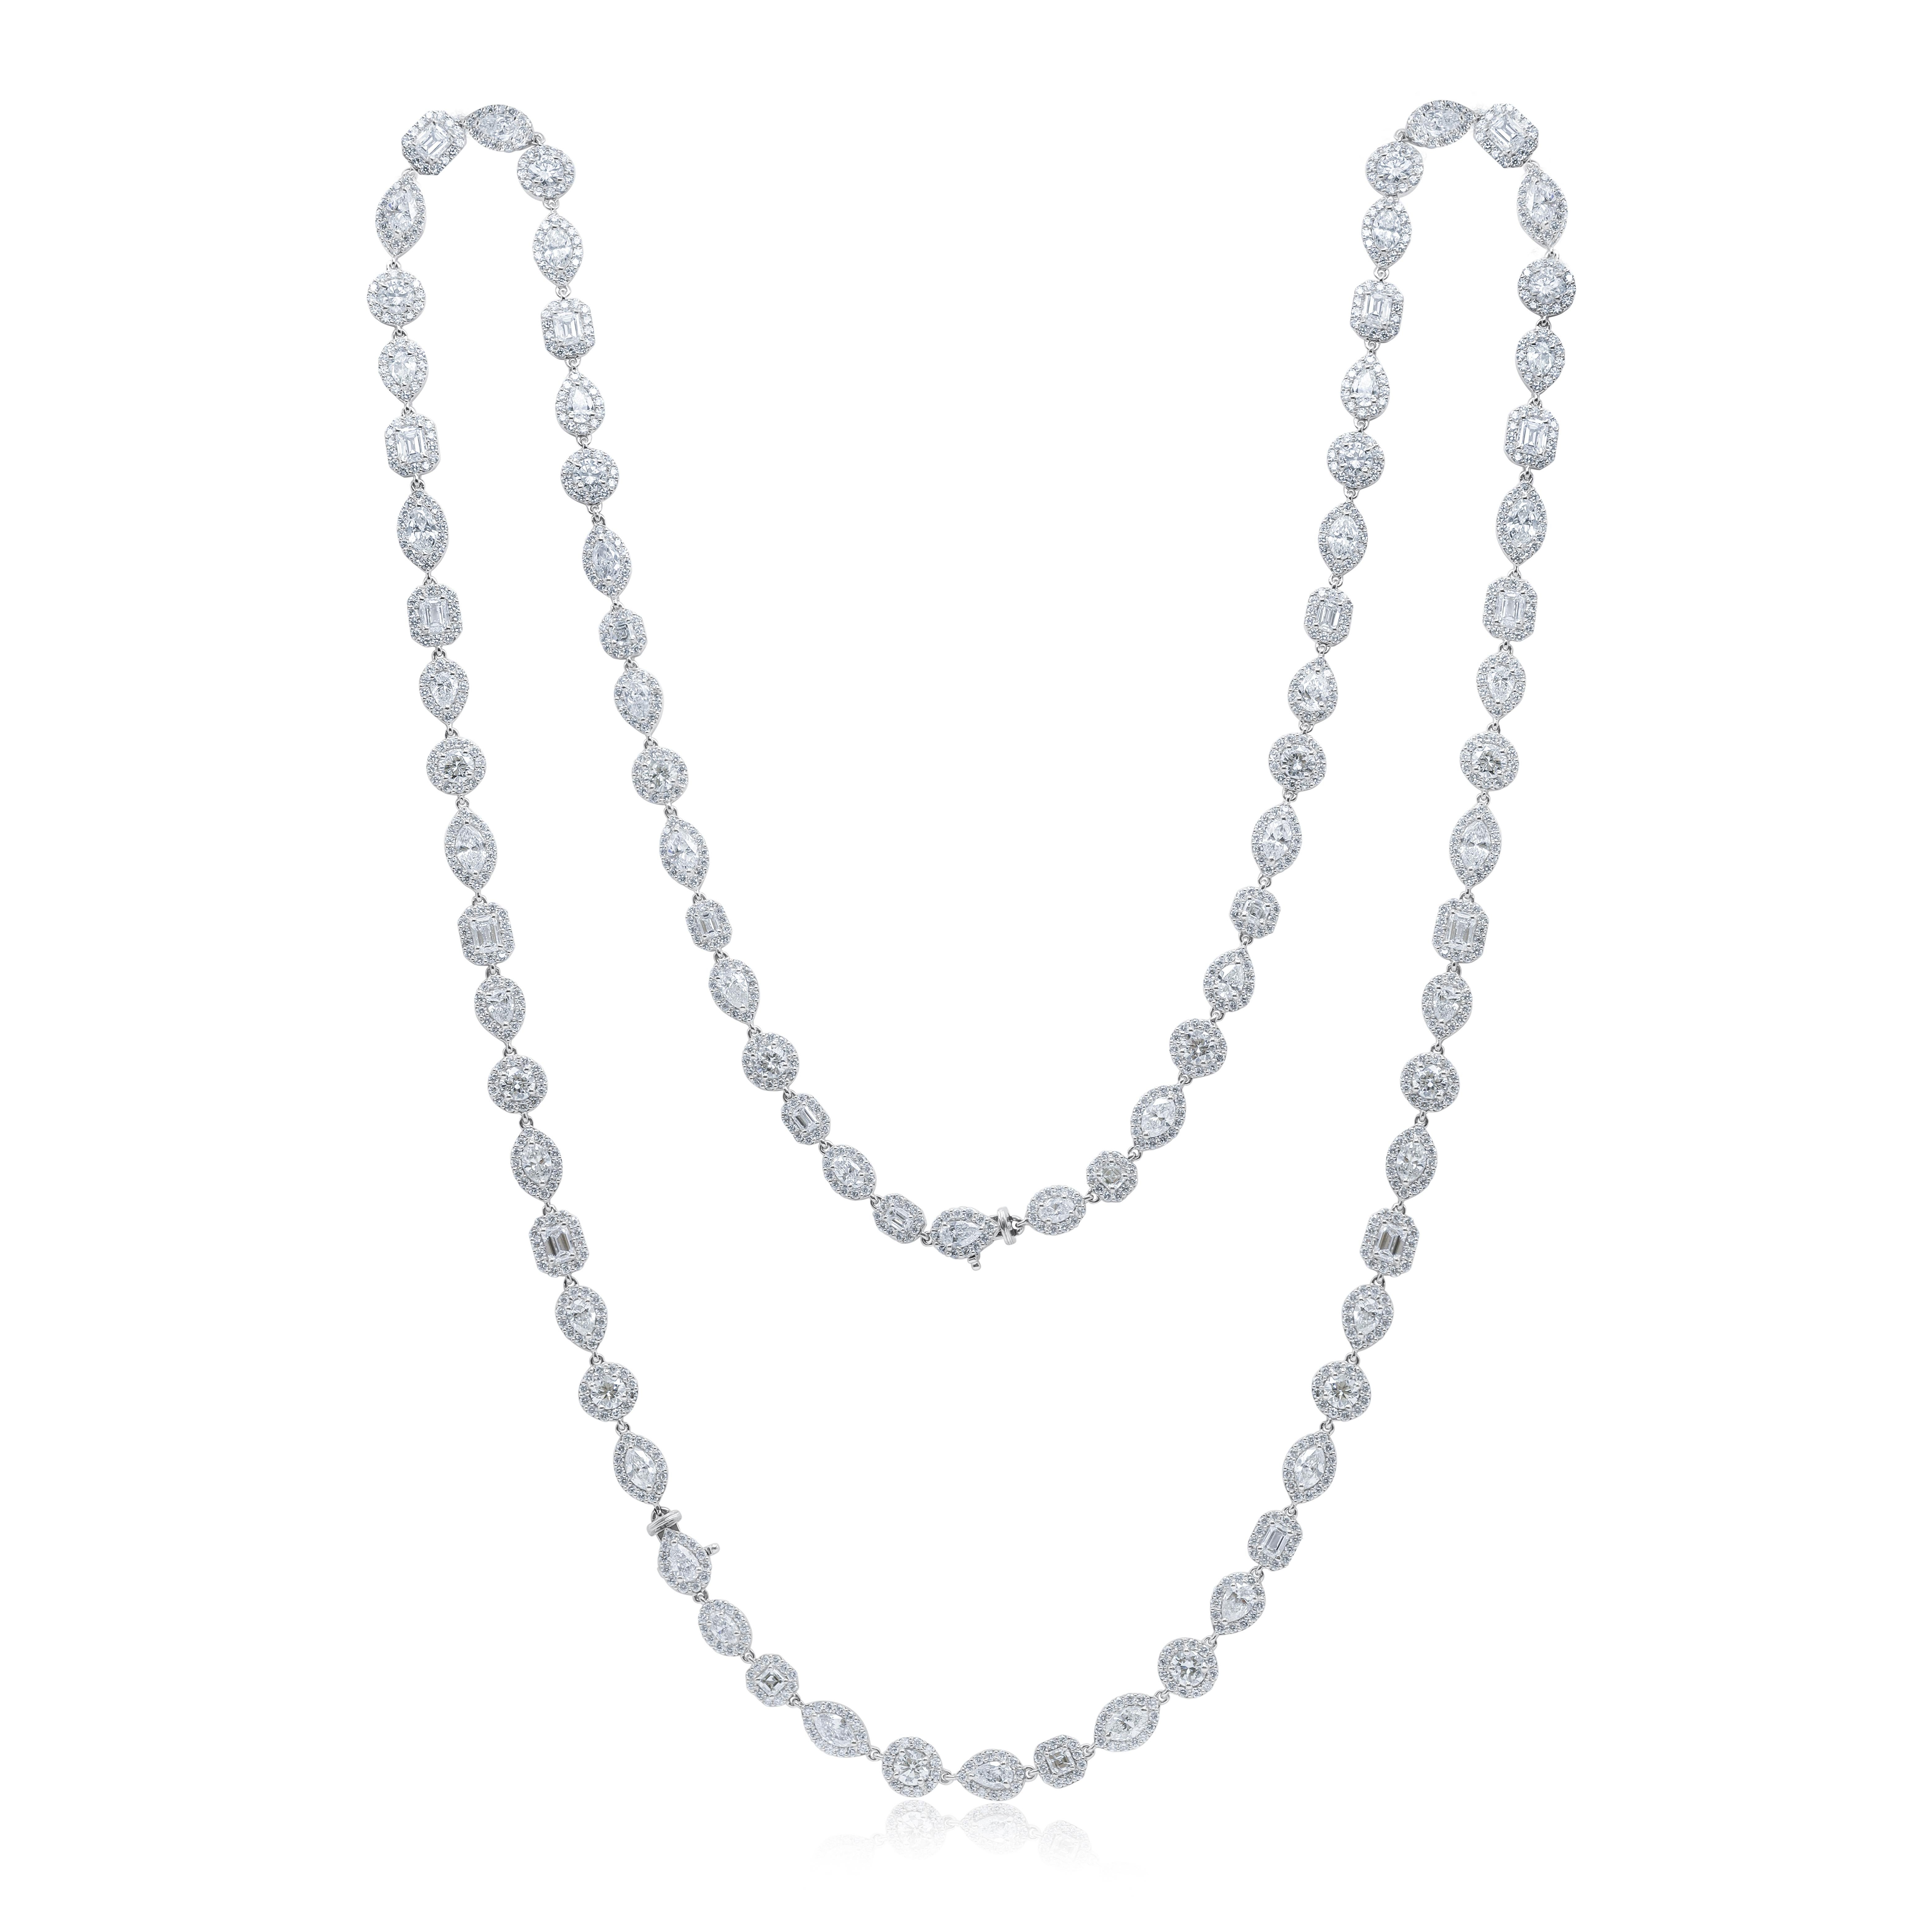 18kt white gold long necklace featuring 45.00 cts of marquise, asscher, oval, and round diamonds 